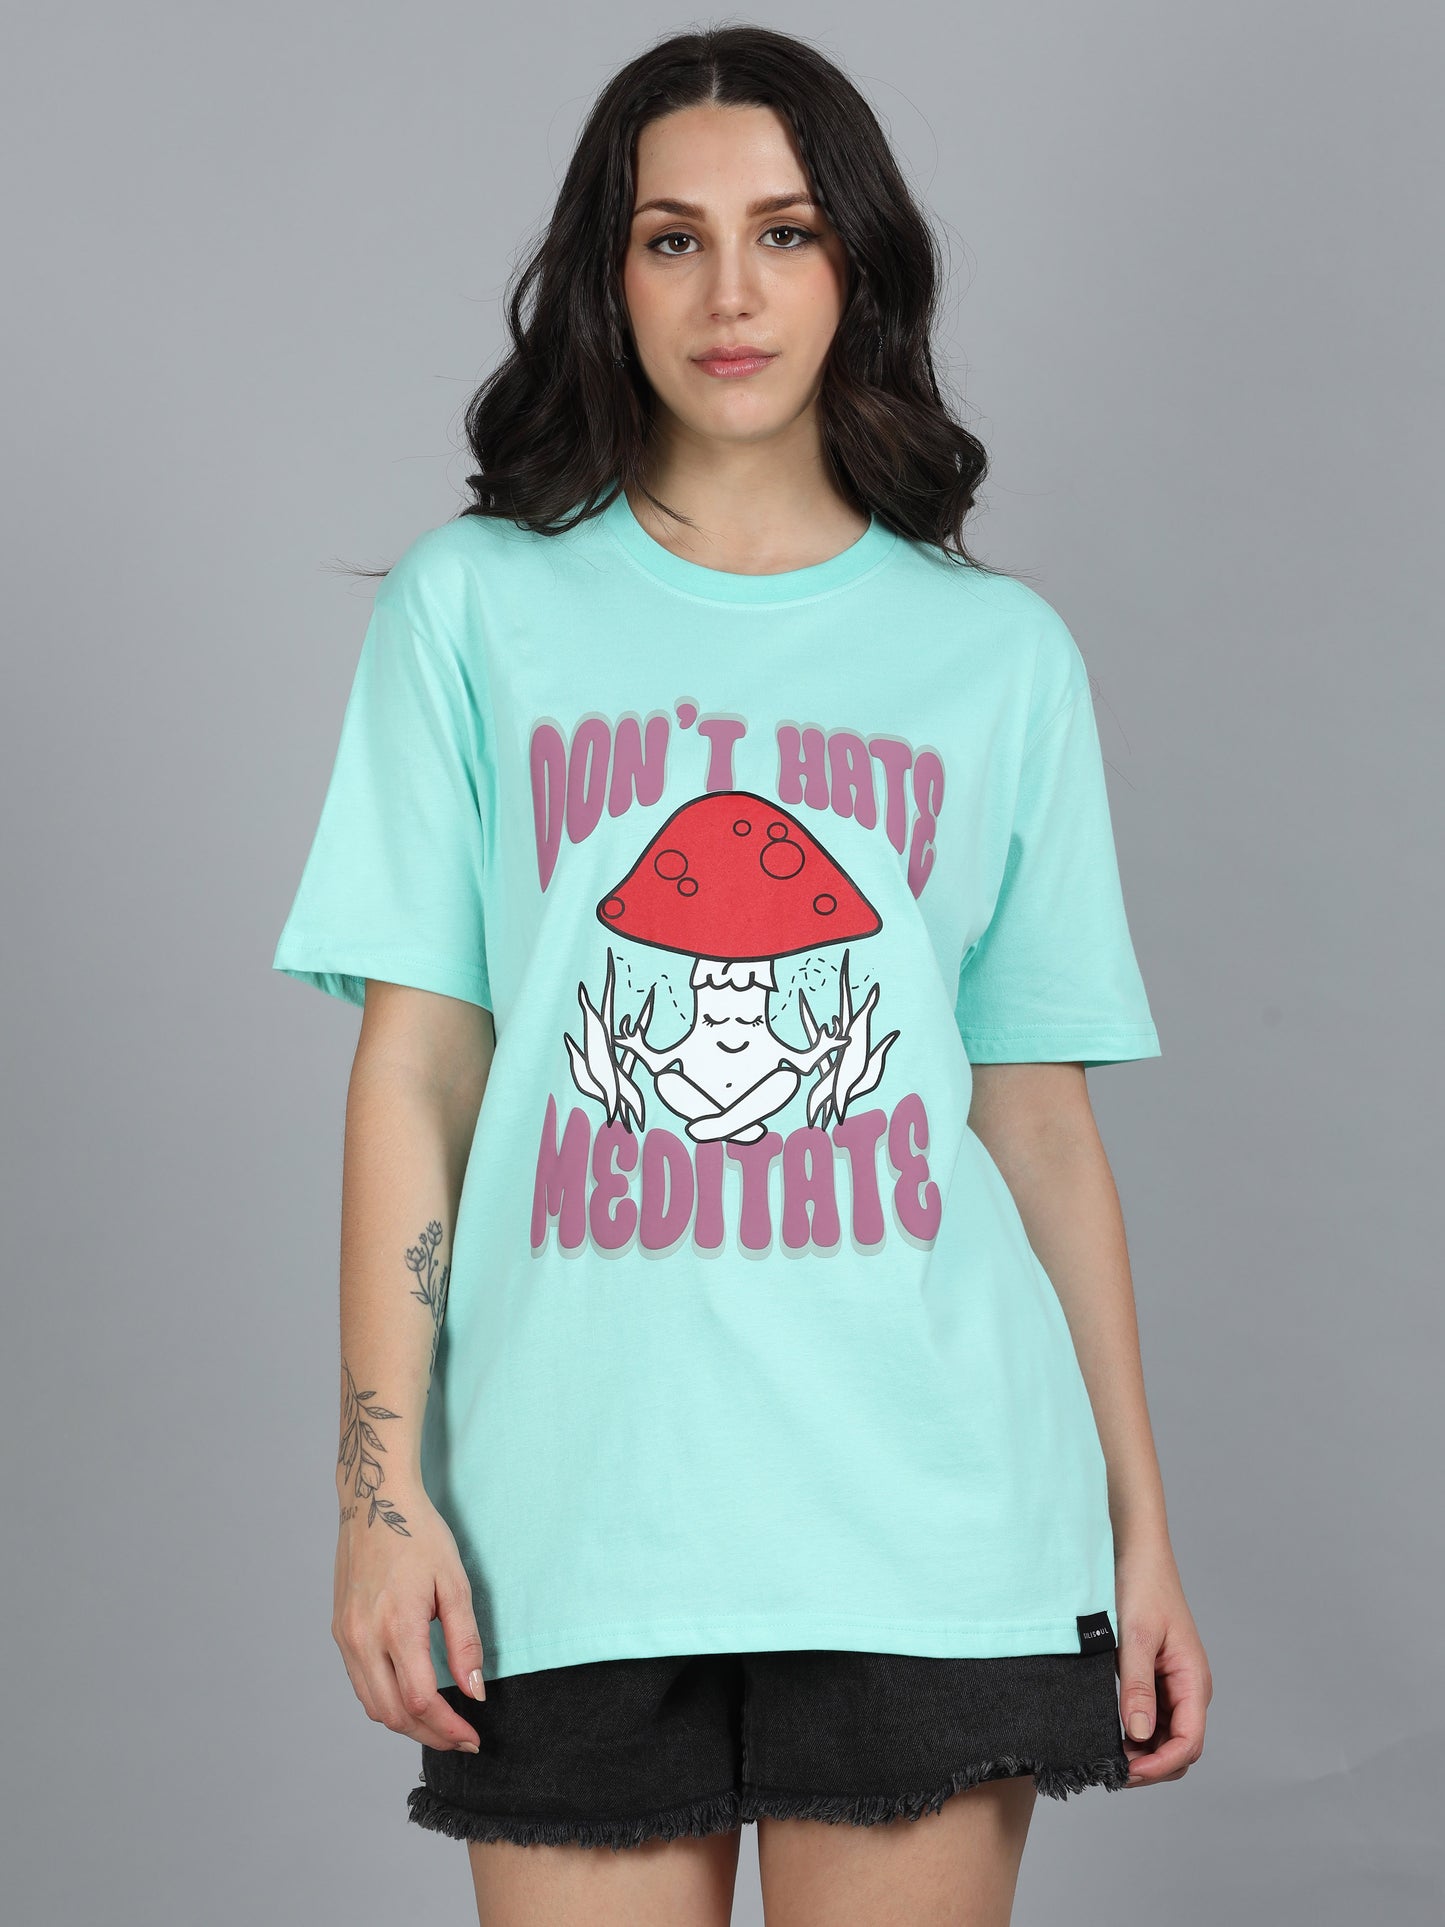 Women Meditate Printed Relaxed Fit T-Shirt